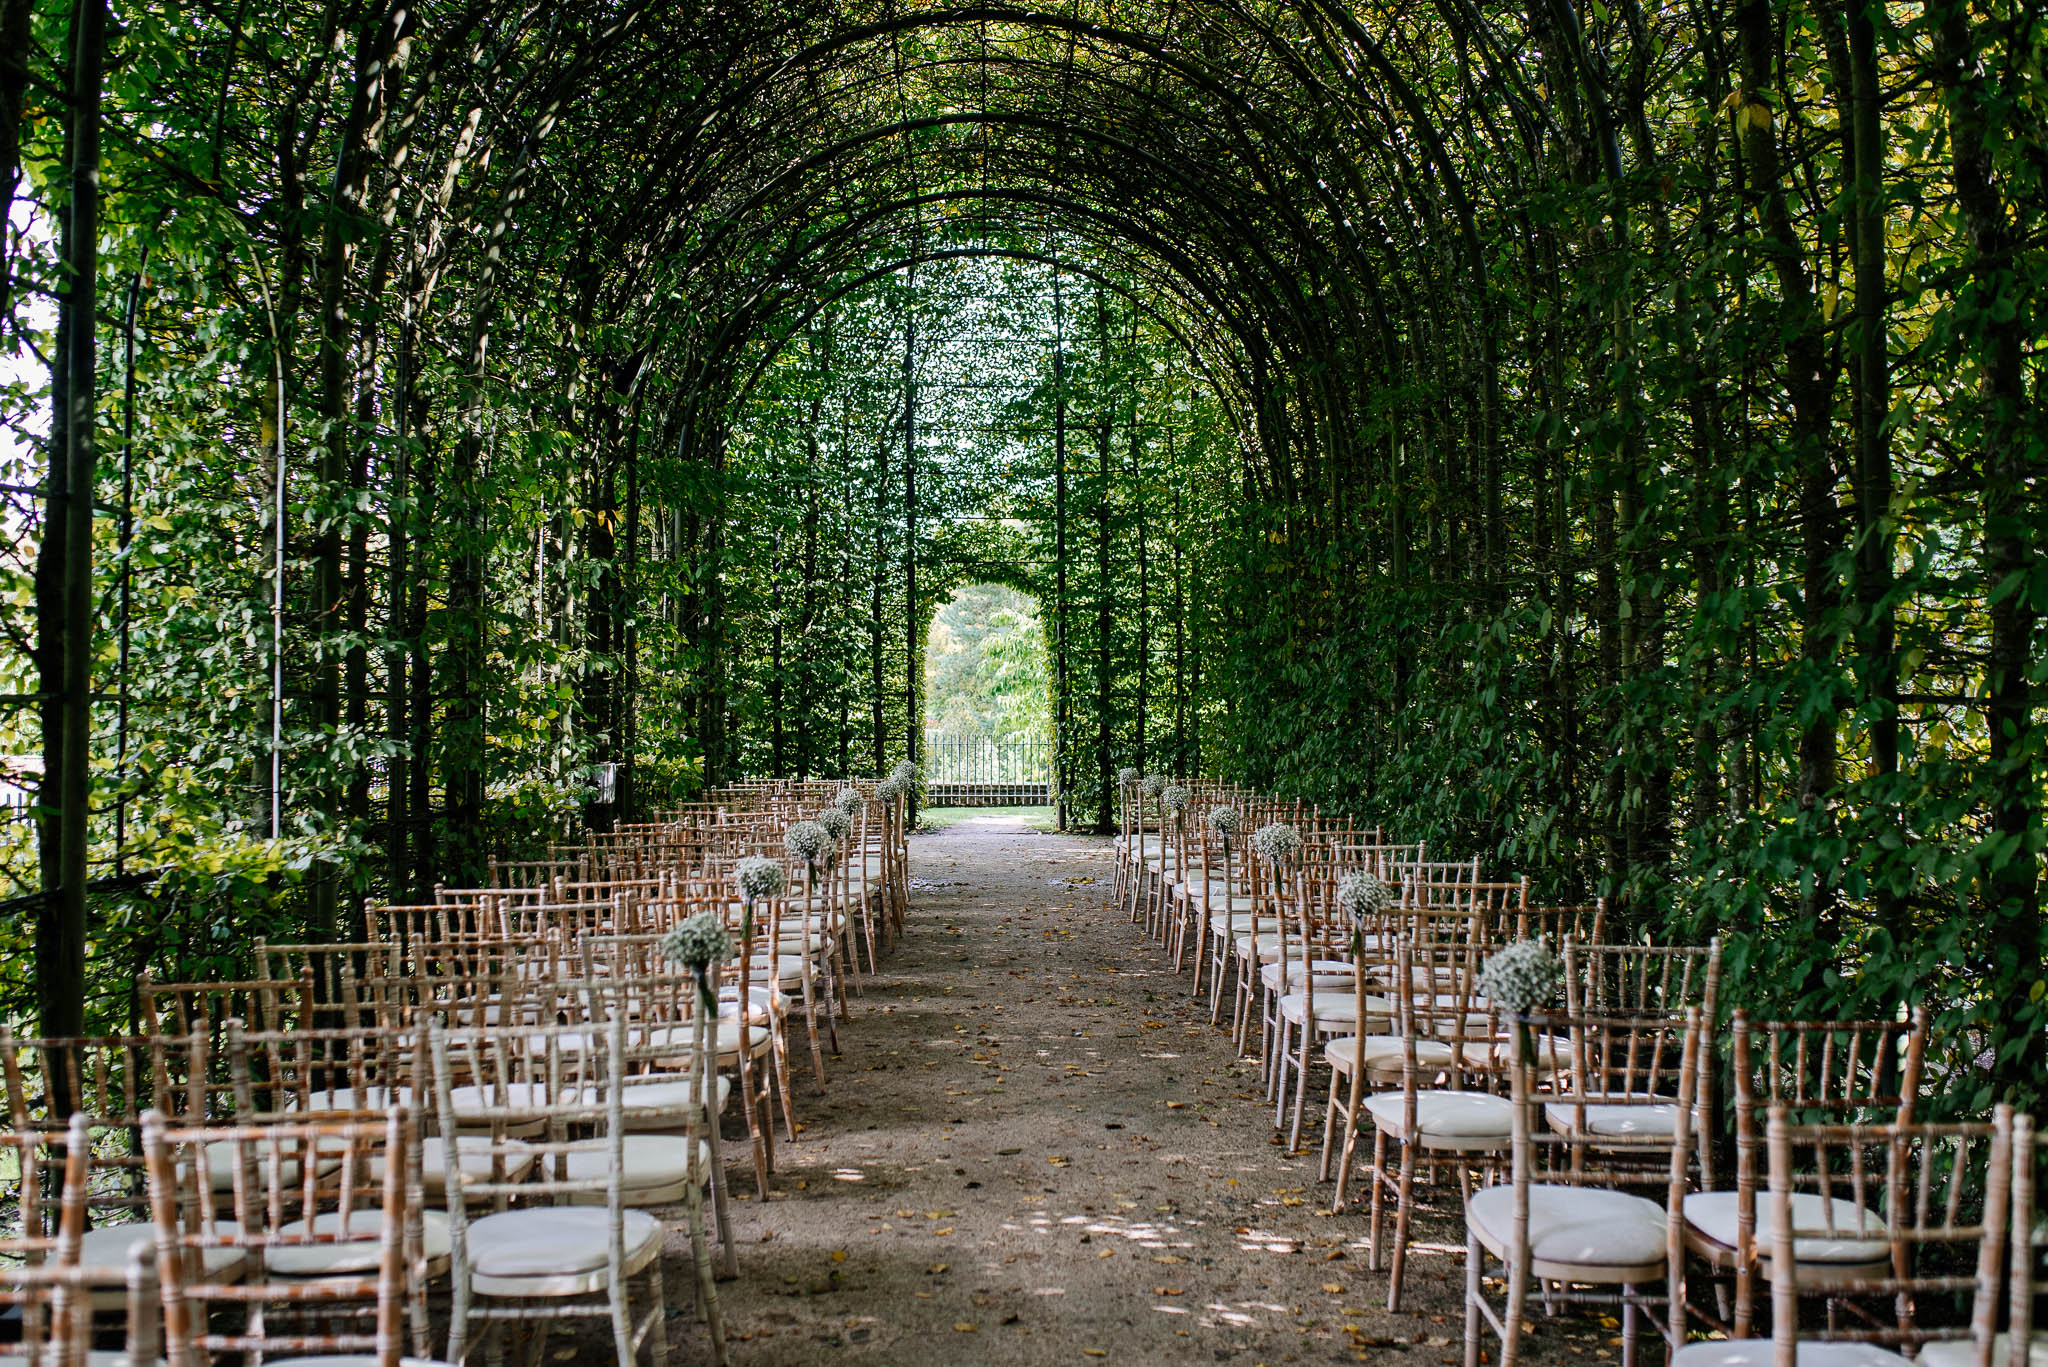 An outdoor wedding venue decorated for a wedding ceremony